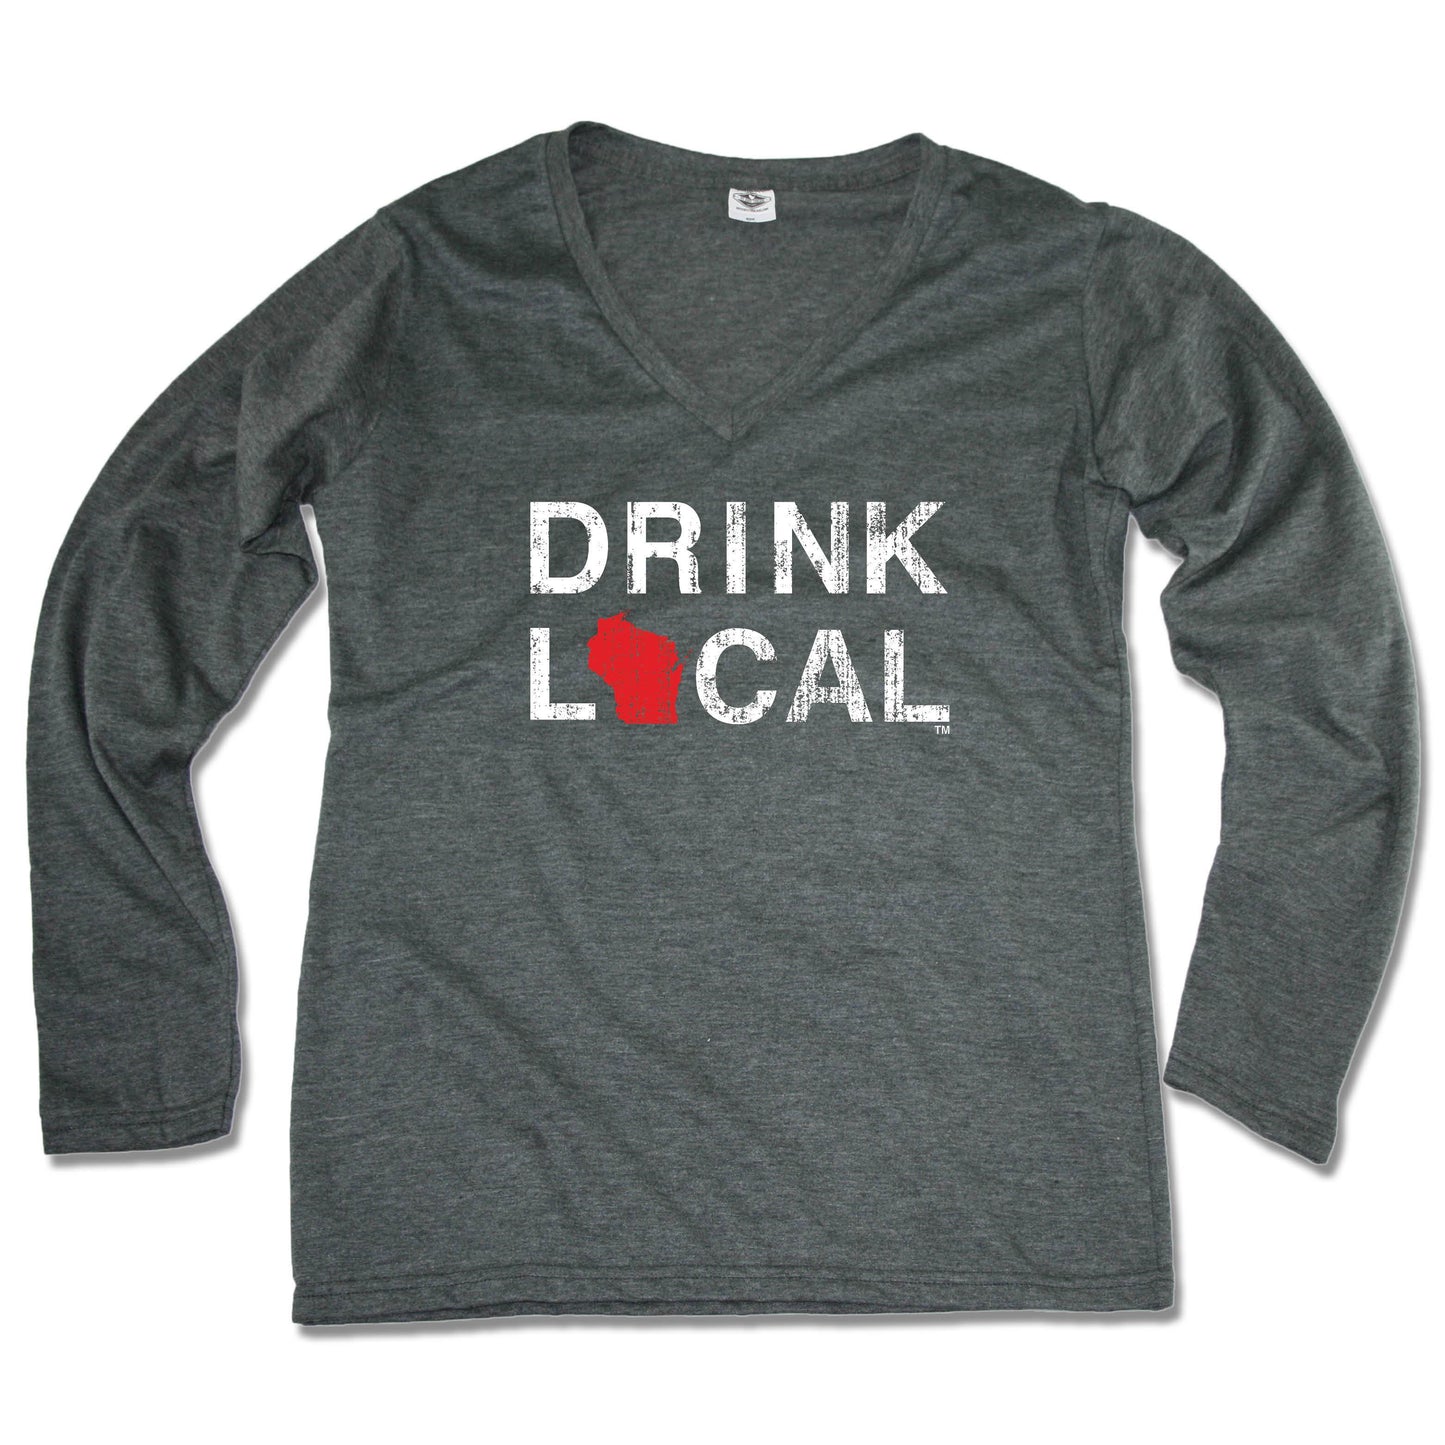 WISCONSIN LADIES' LONGSLEEVE V-NECK | DRINK LOCAL | RED